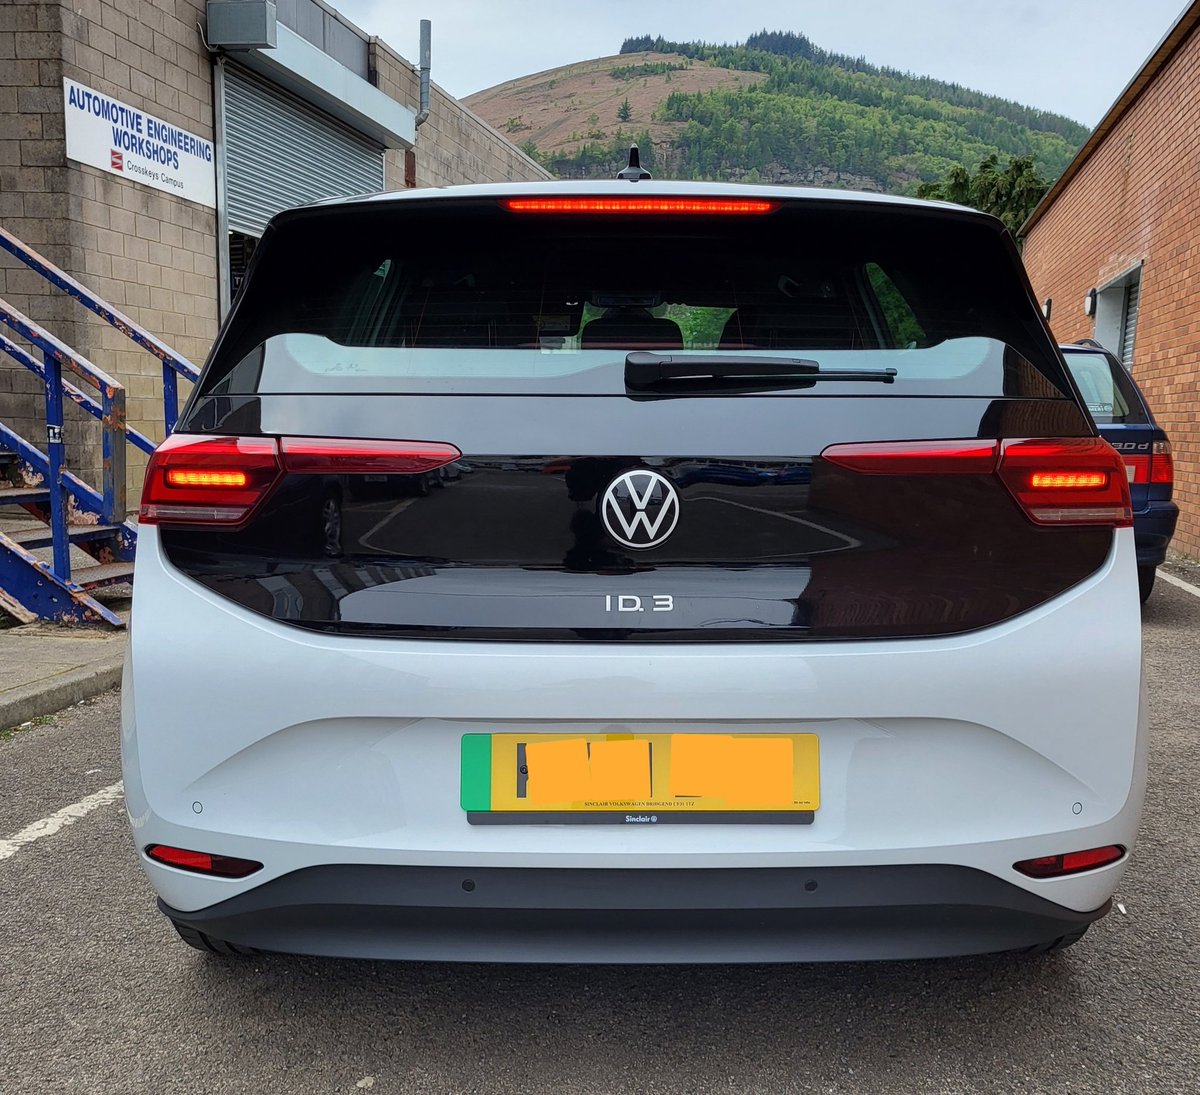 New electric vehicles arrived at @coleggwent #CrosskeysCampus this week to join our @Tesla Model 3, @NissanElectric Leaf, @BMWi i3 and @ToyotaUK Prius. Thank you to @drivegreenuk for your help providing the 3 Nissan Leafs and @VW Bridgend for the ID3.